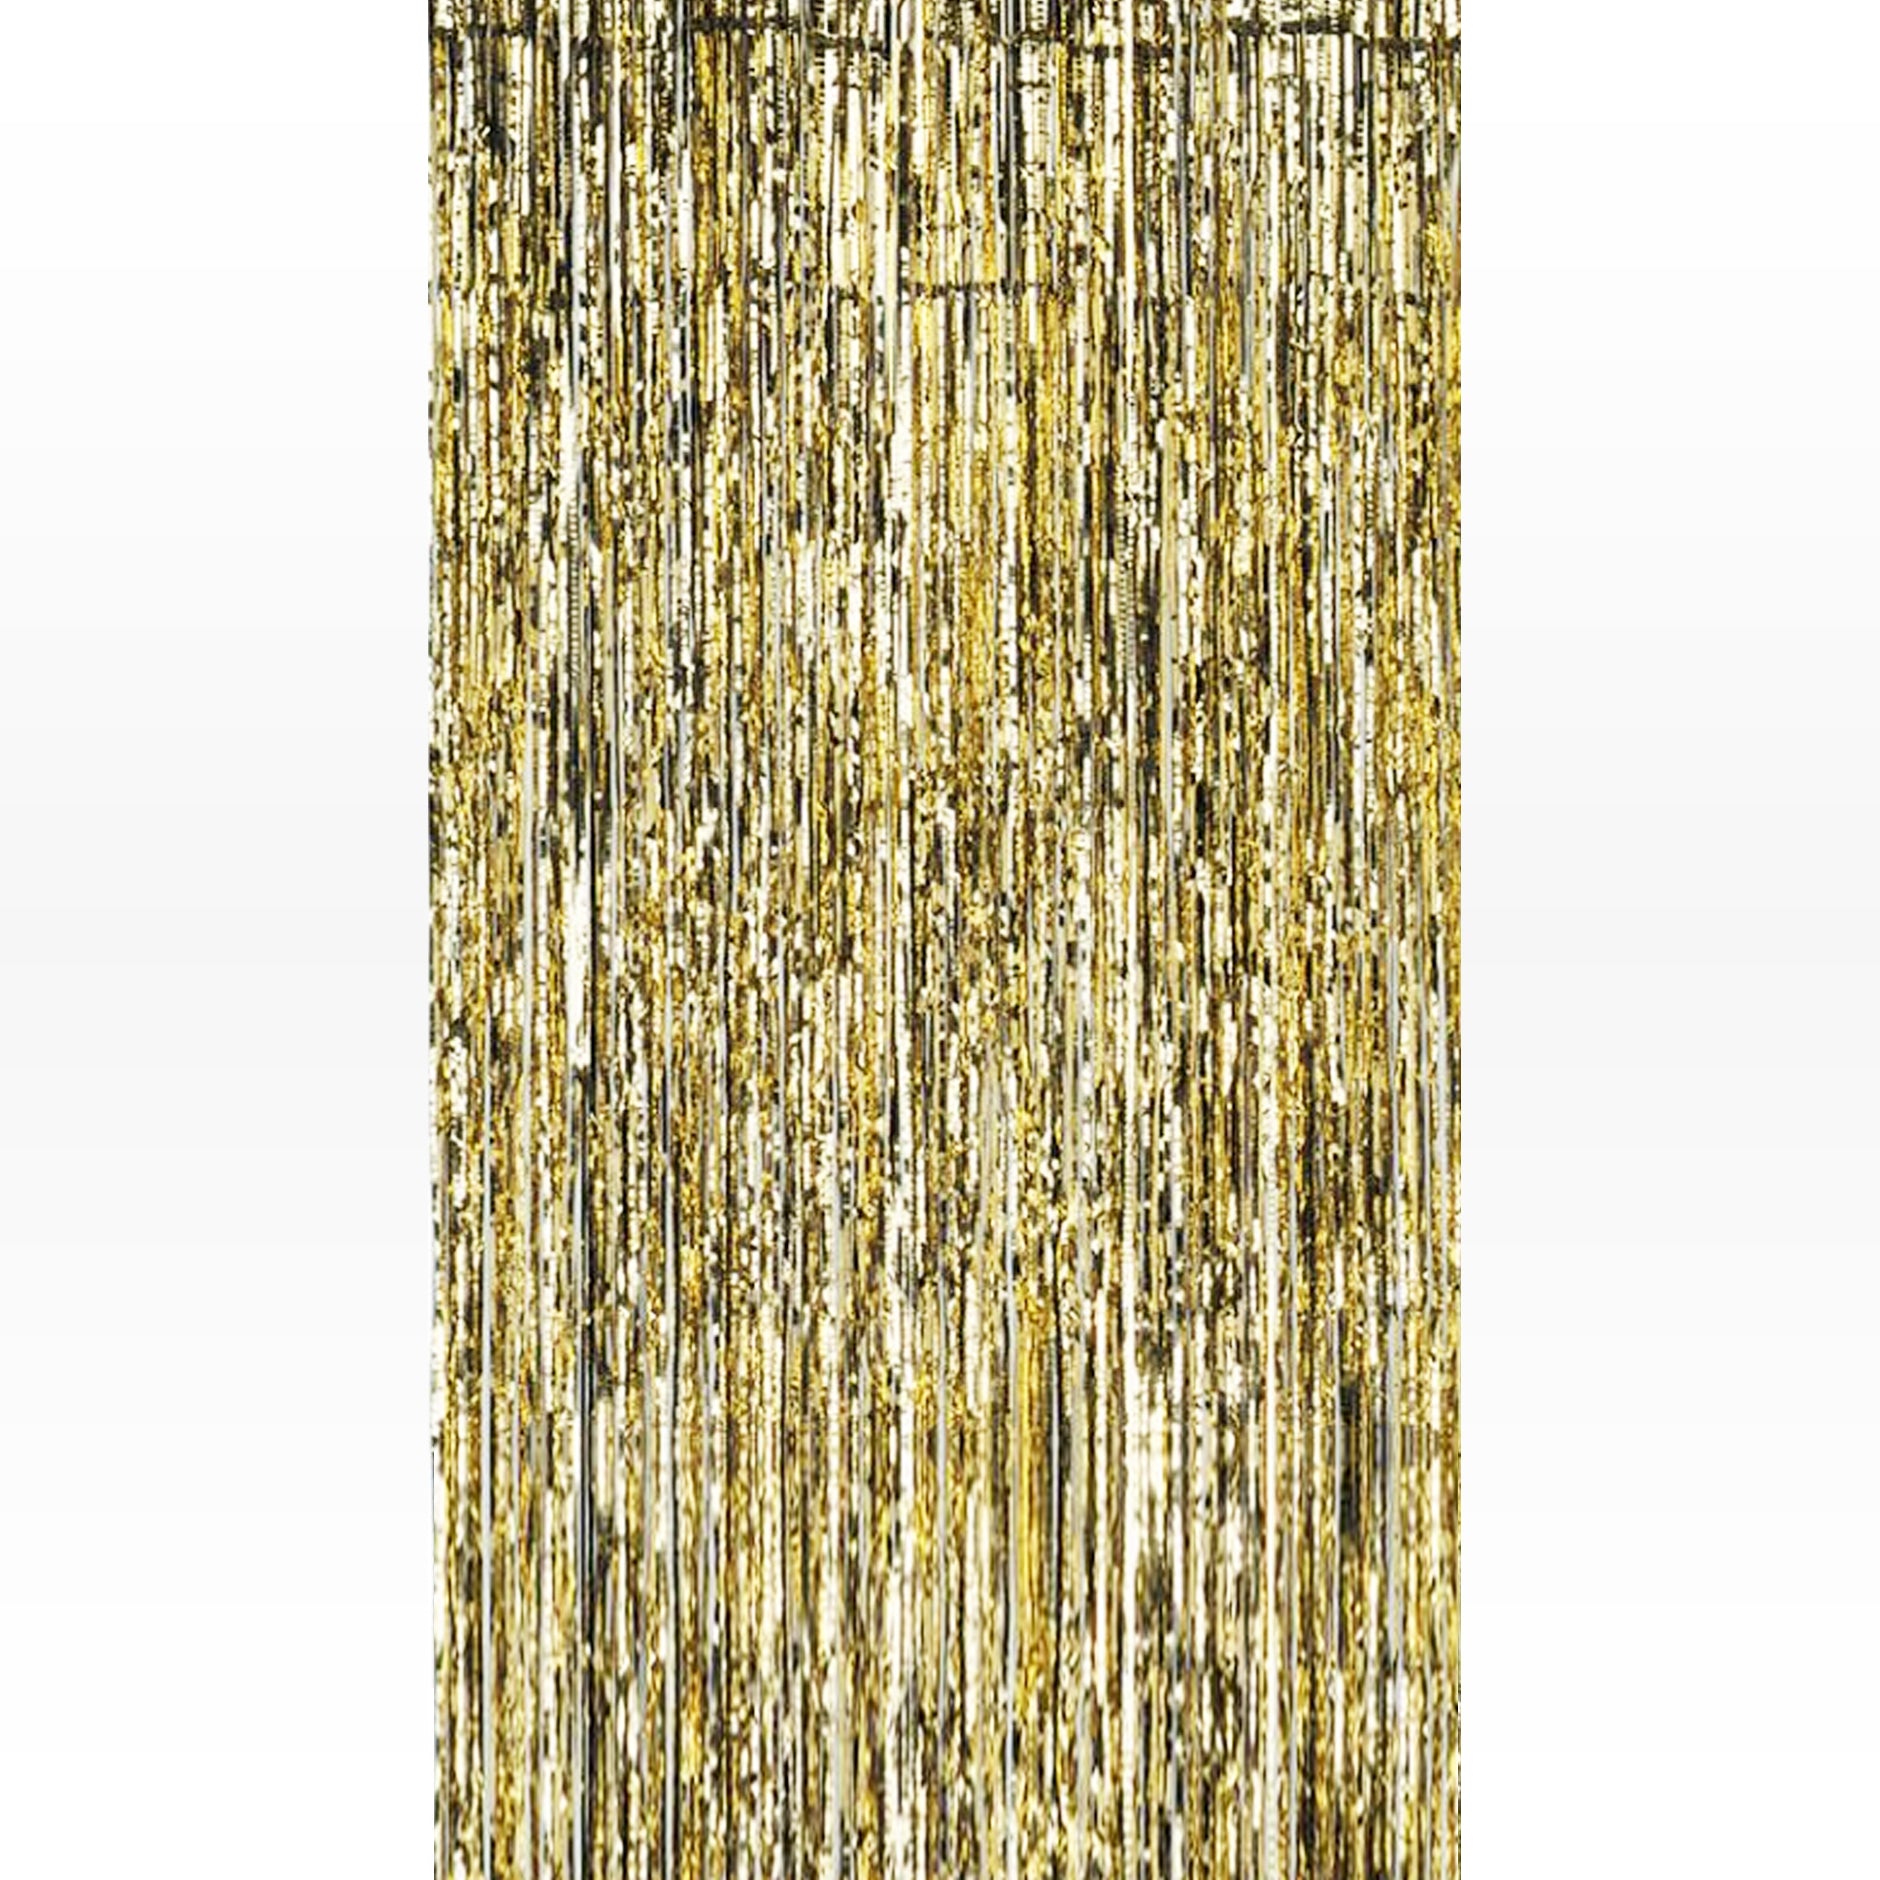 Gold Shimmer Curtain - Flame Retardent - 2.5m x 90cm